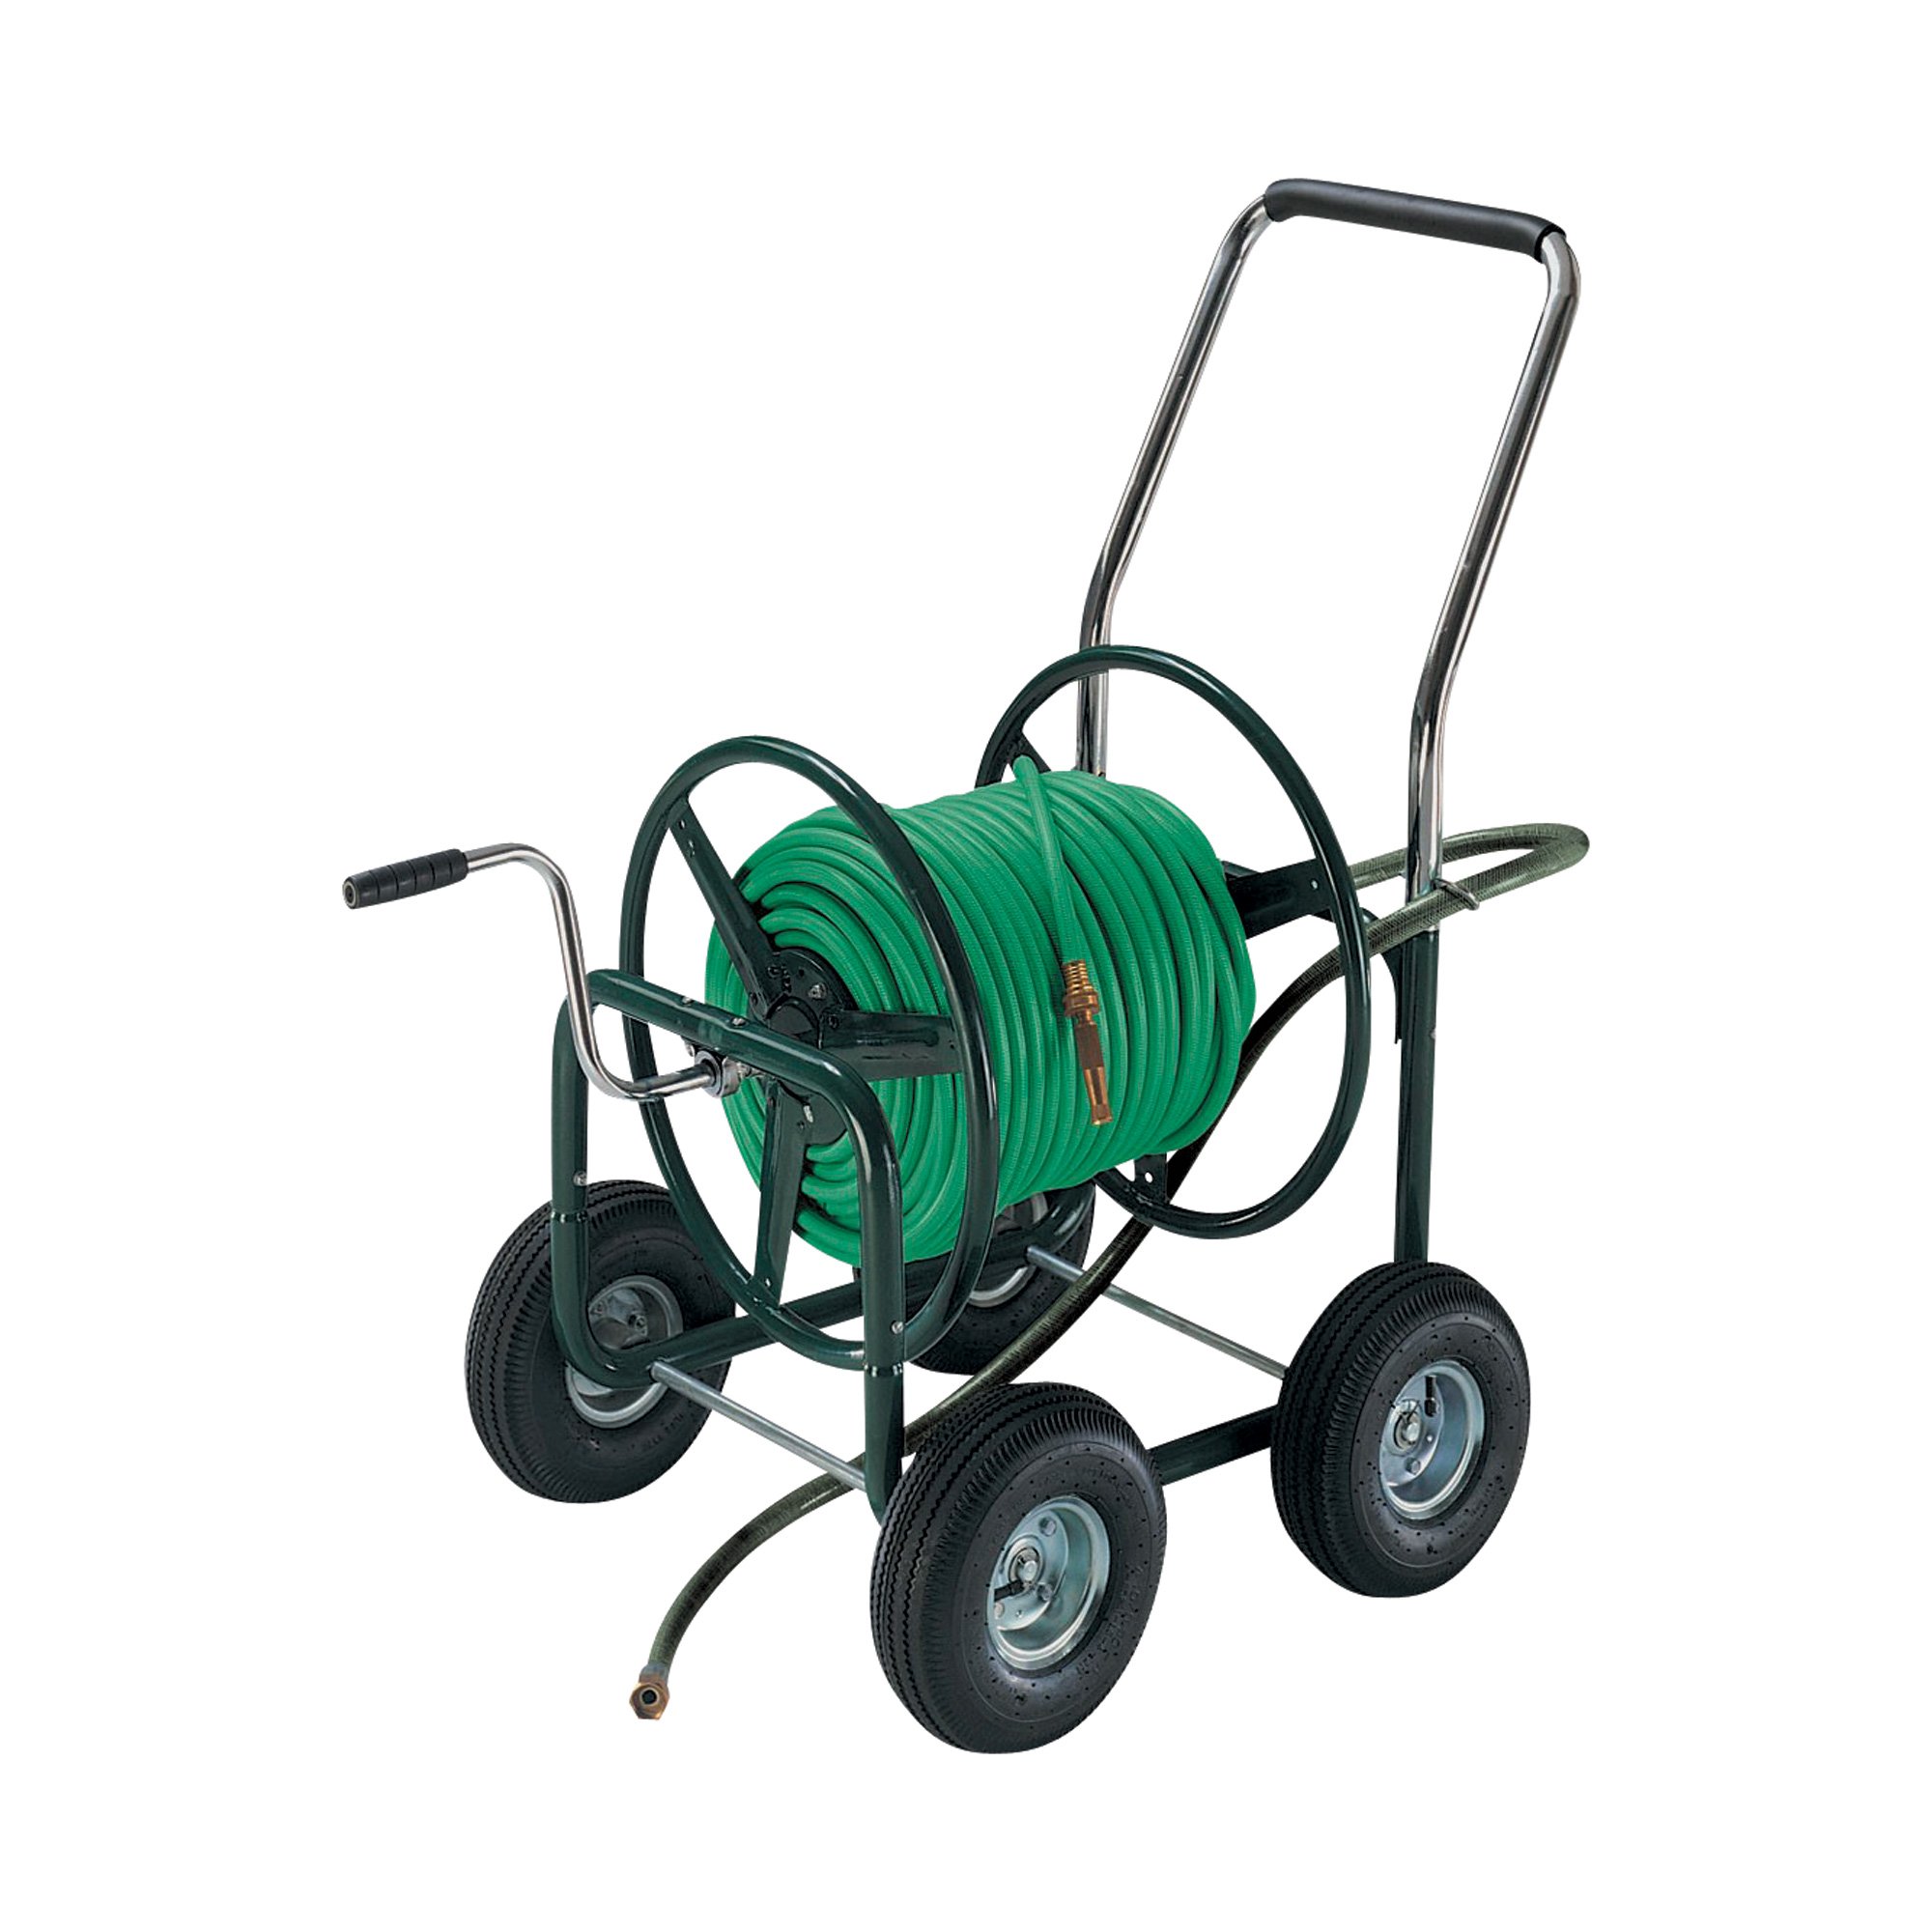 Ames Industrial Hose Wagon — Holds 5/8in. x 400ft. Hose, Model# 2380500